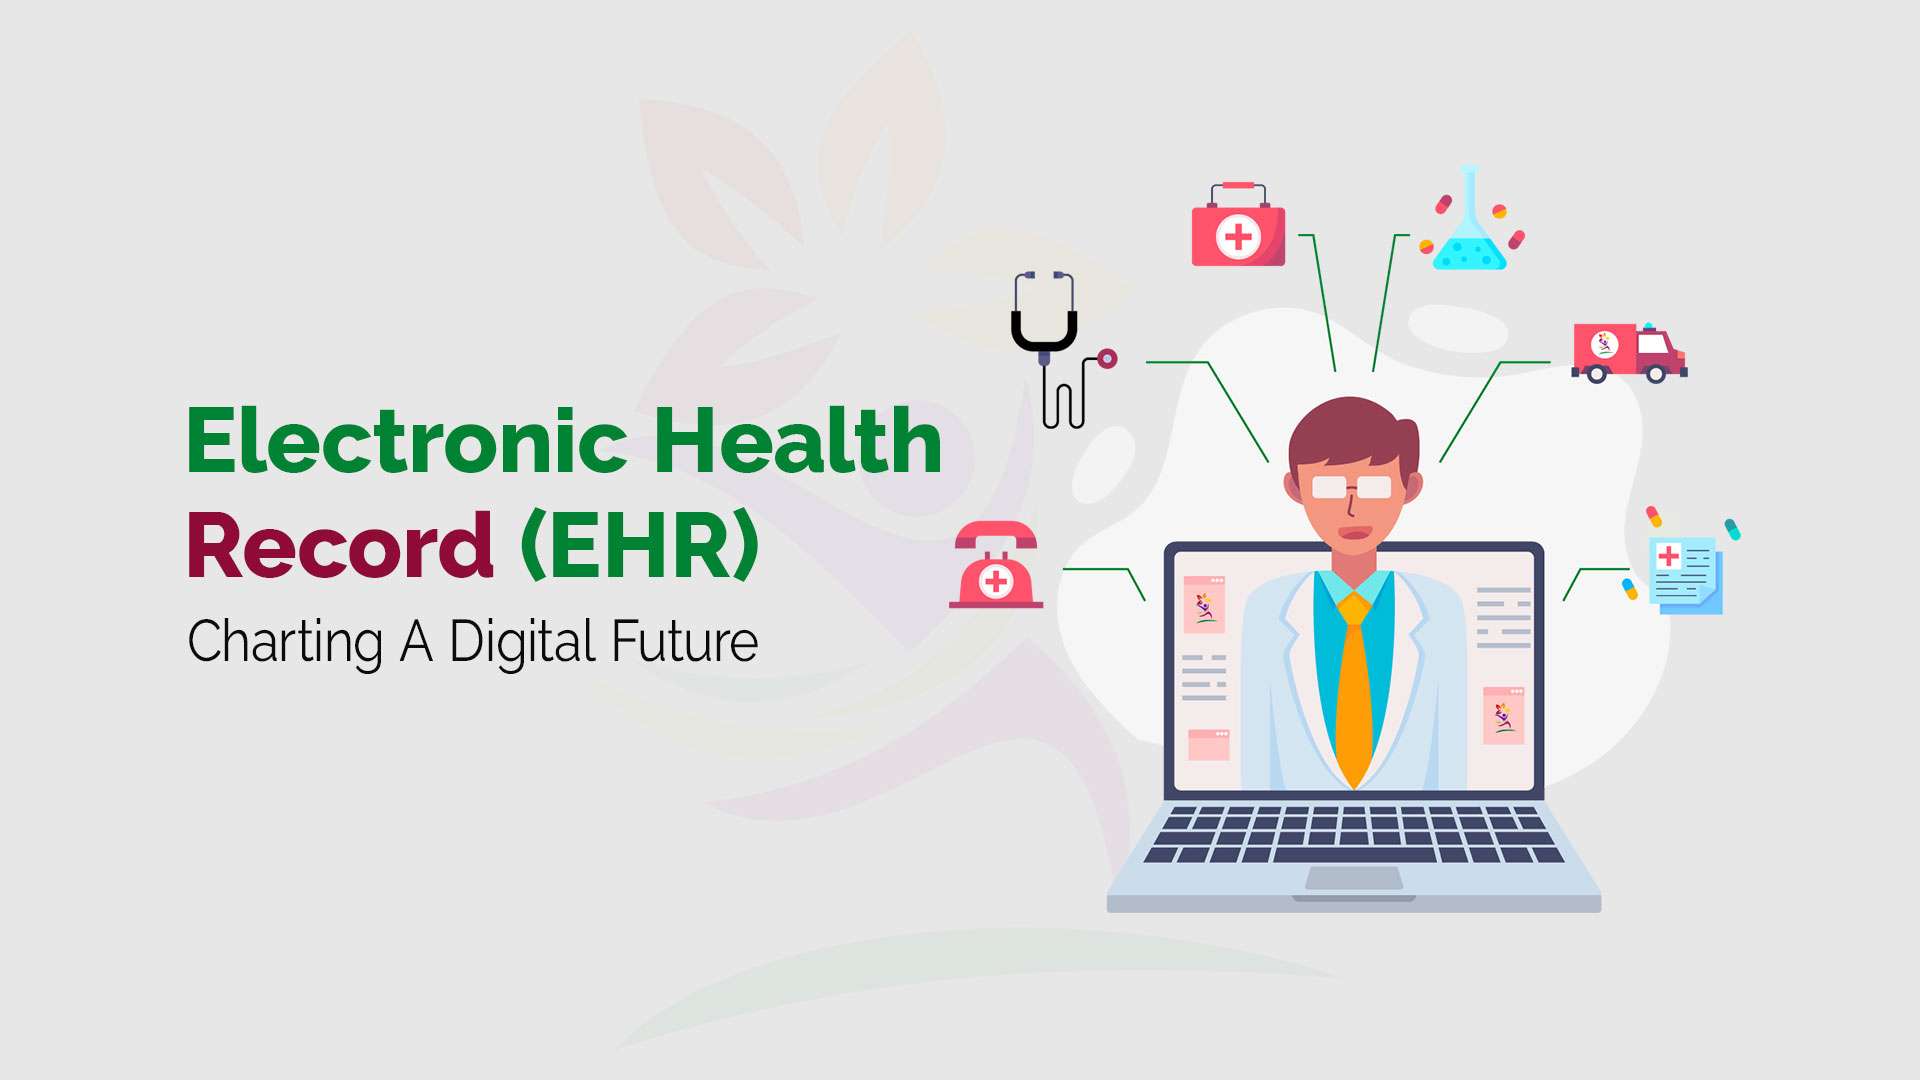 Electronic Health Record (EHR)